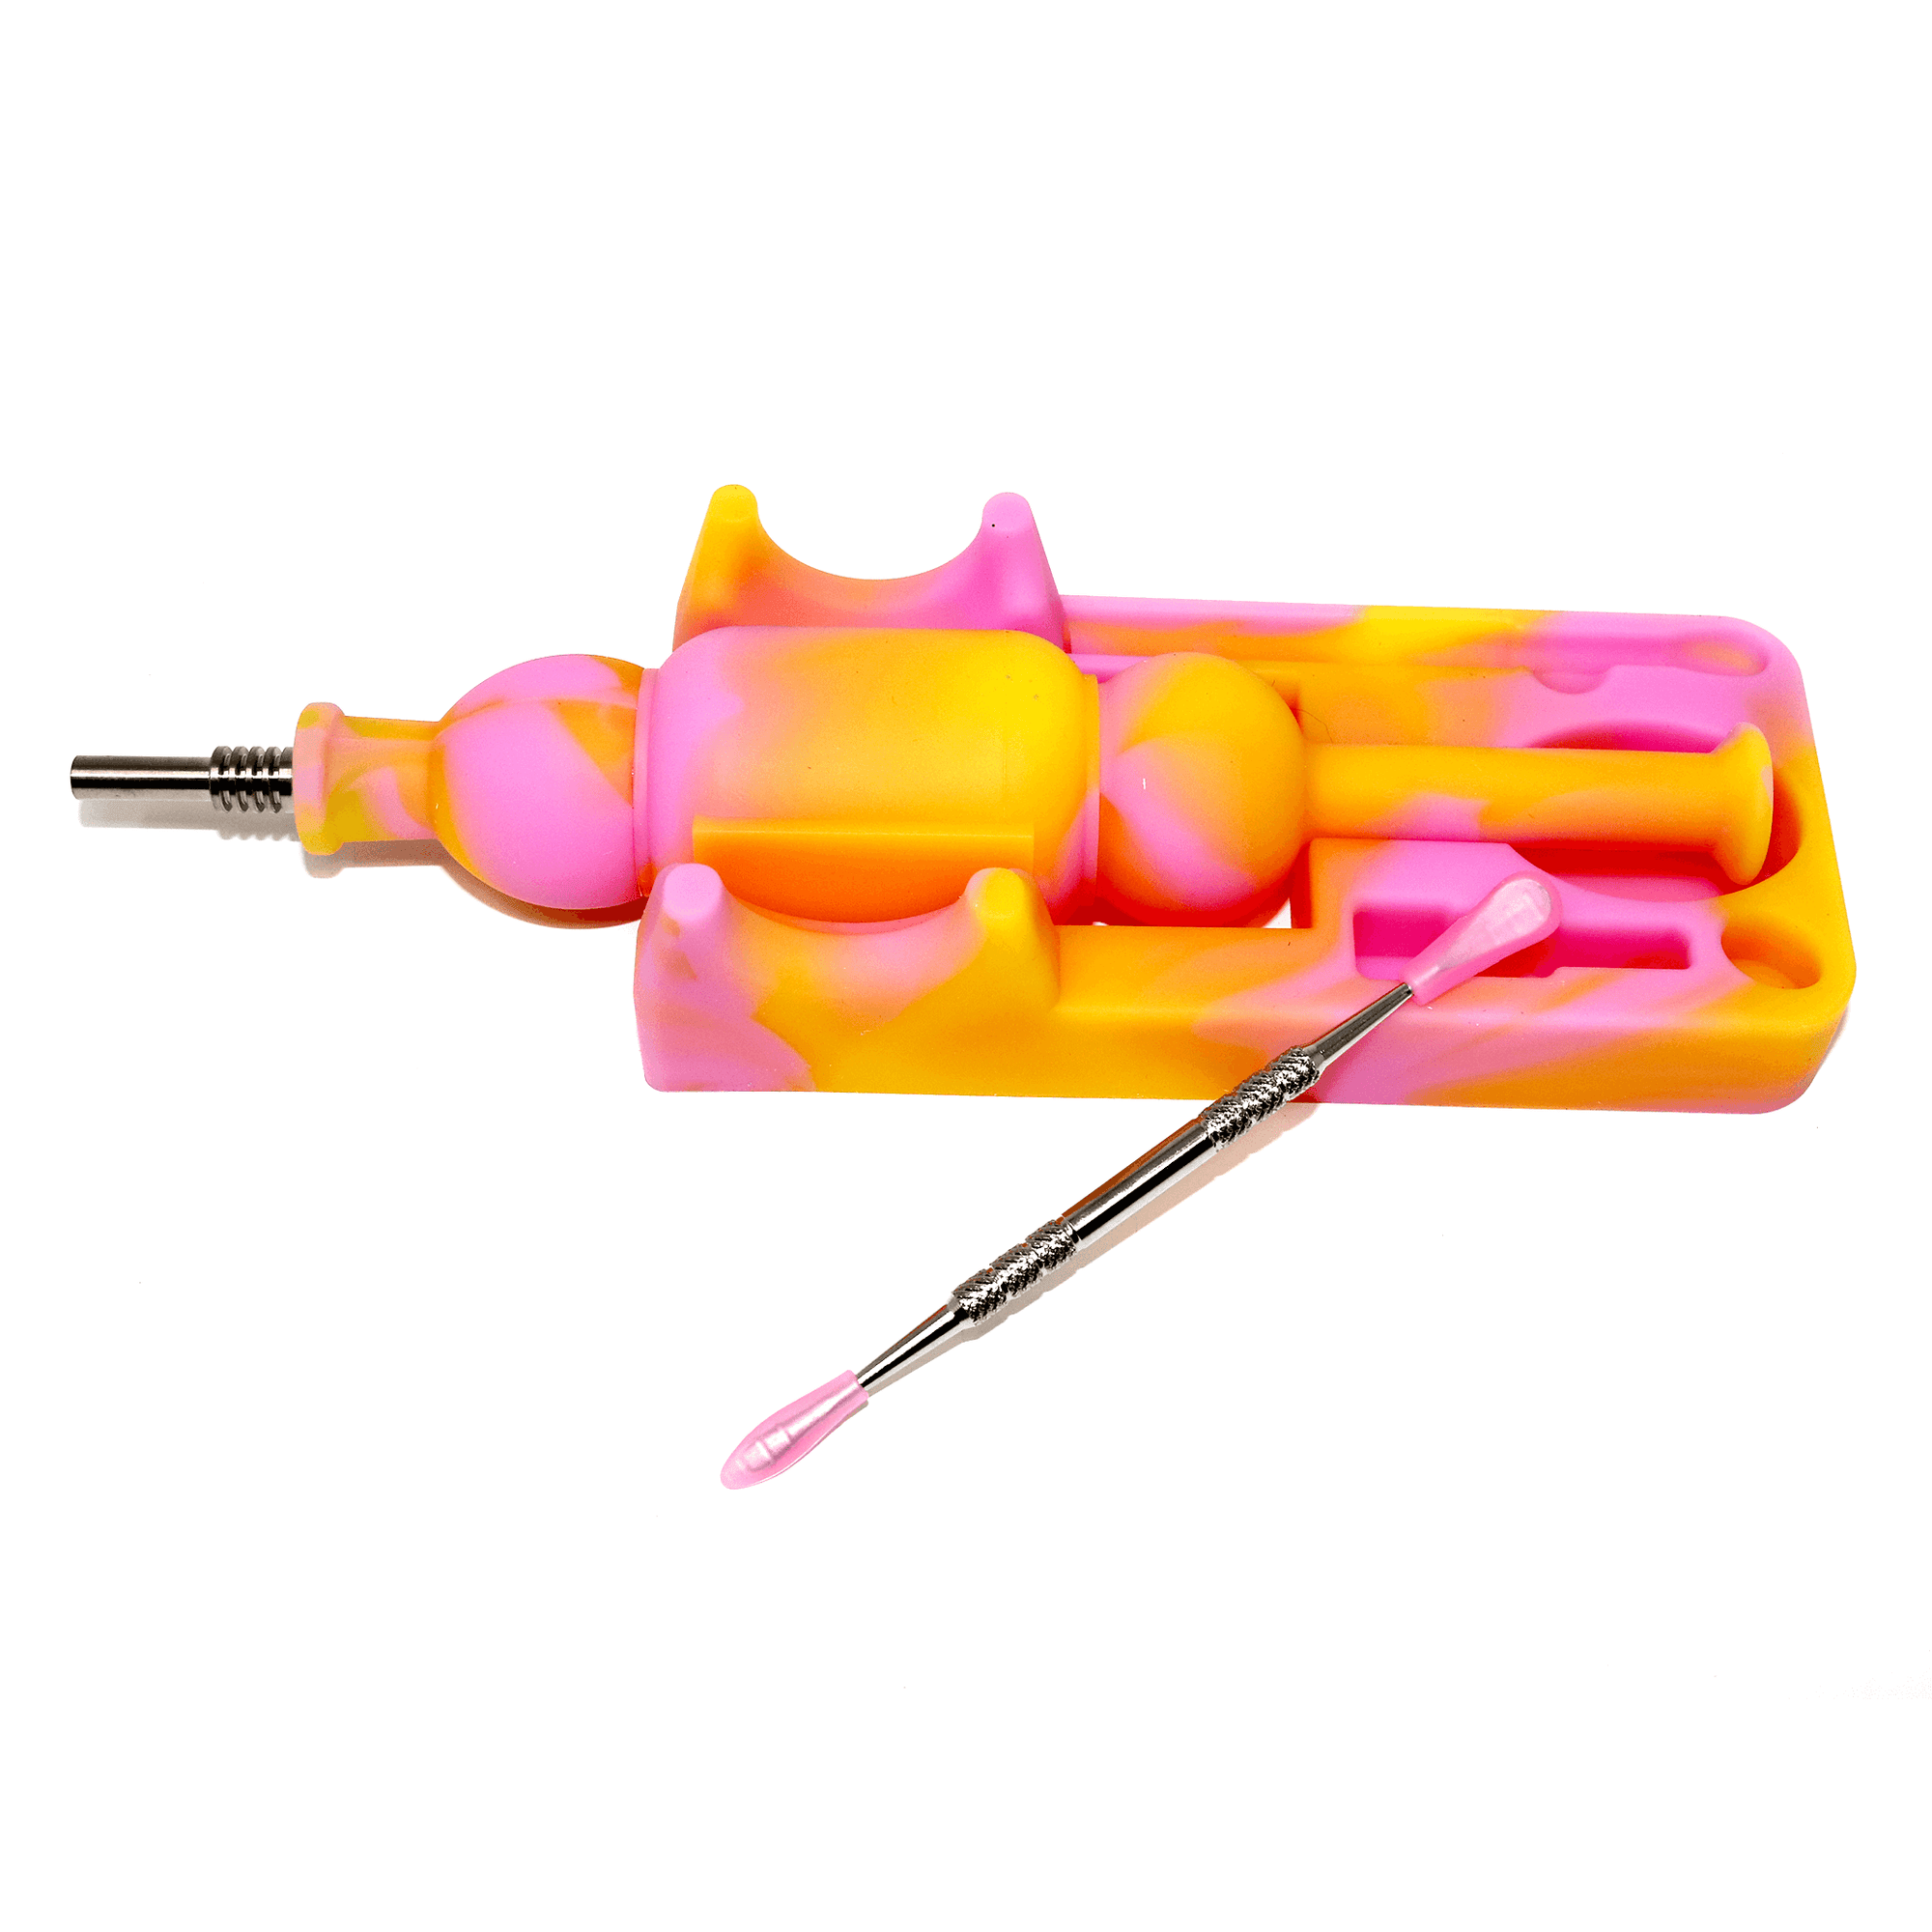 Silicone Nectar Collector | Lavender, Orange, & Pink In Use View | Dabbing Warehouse